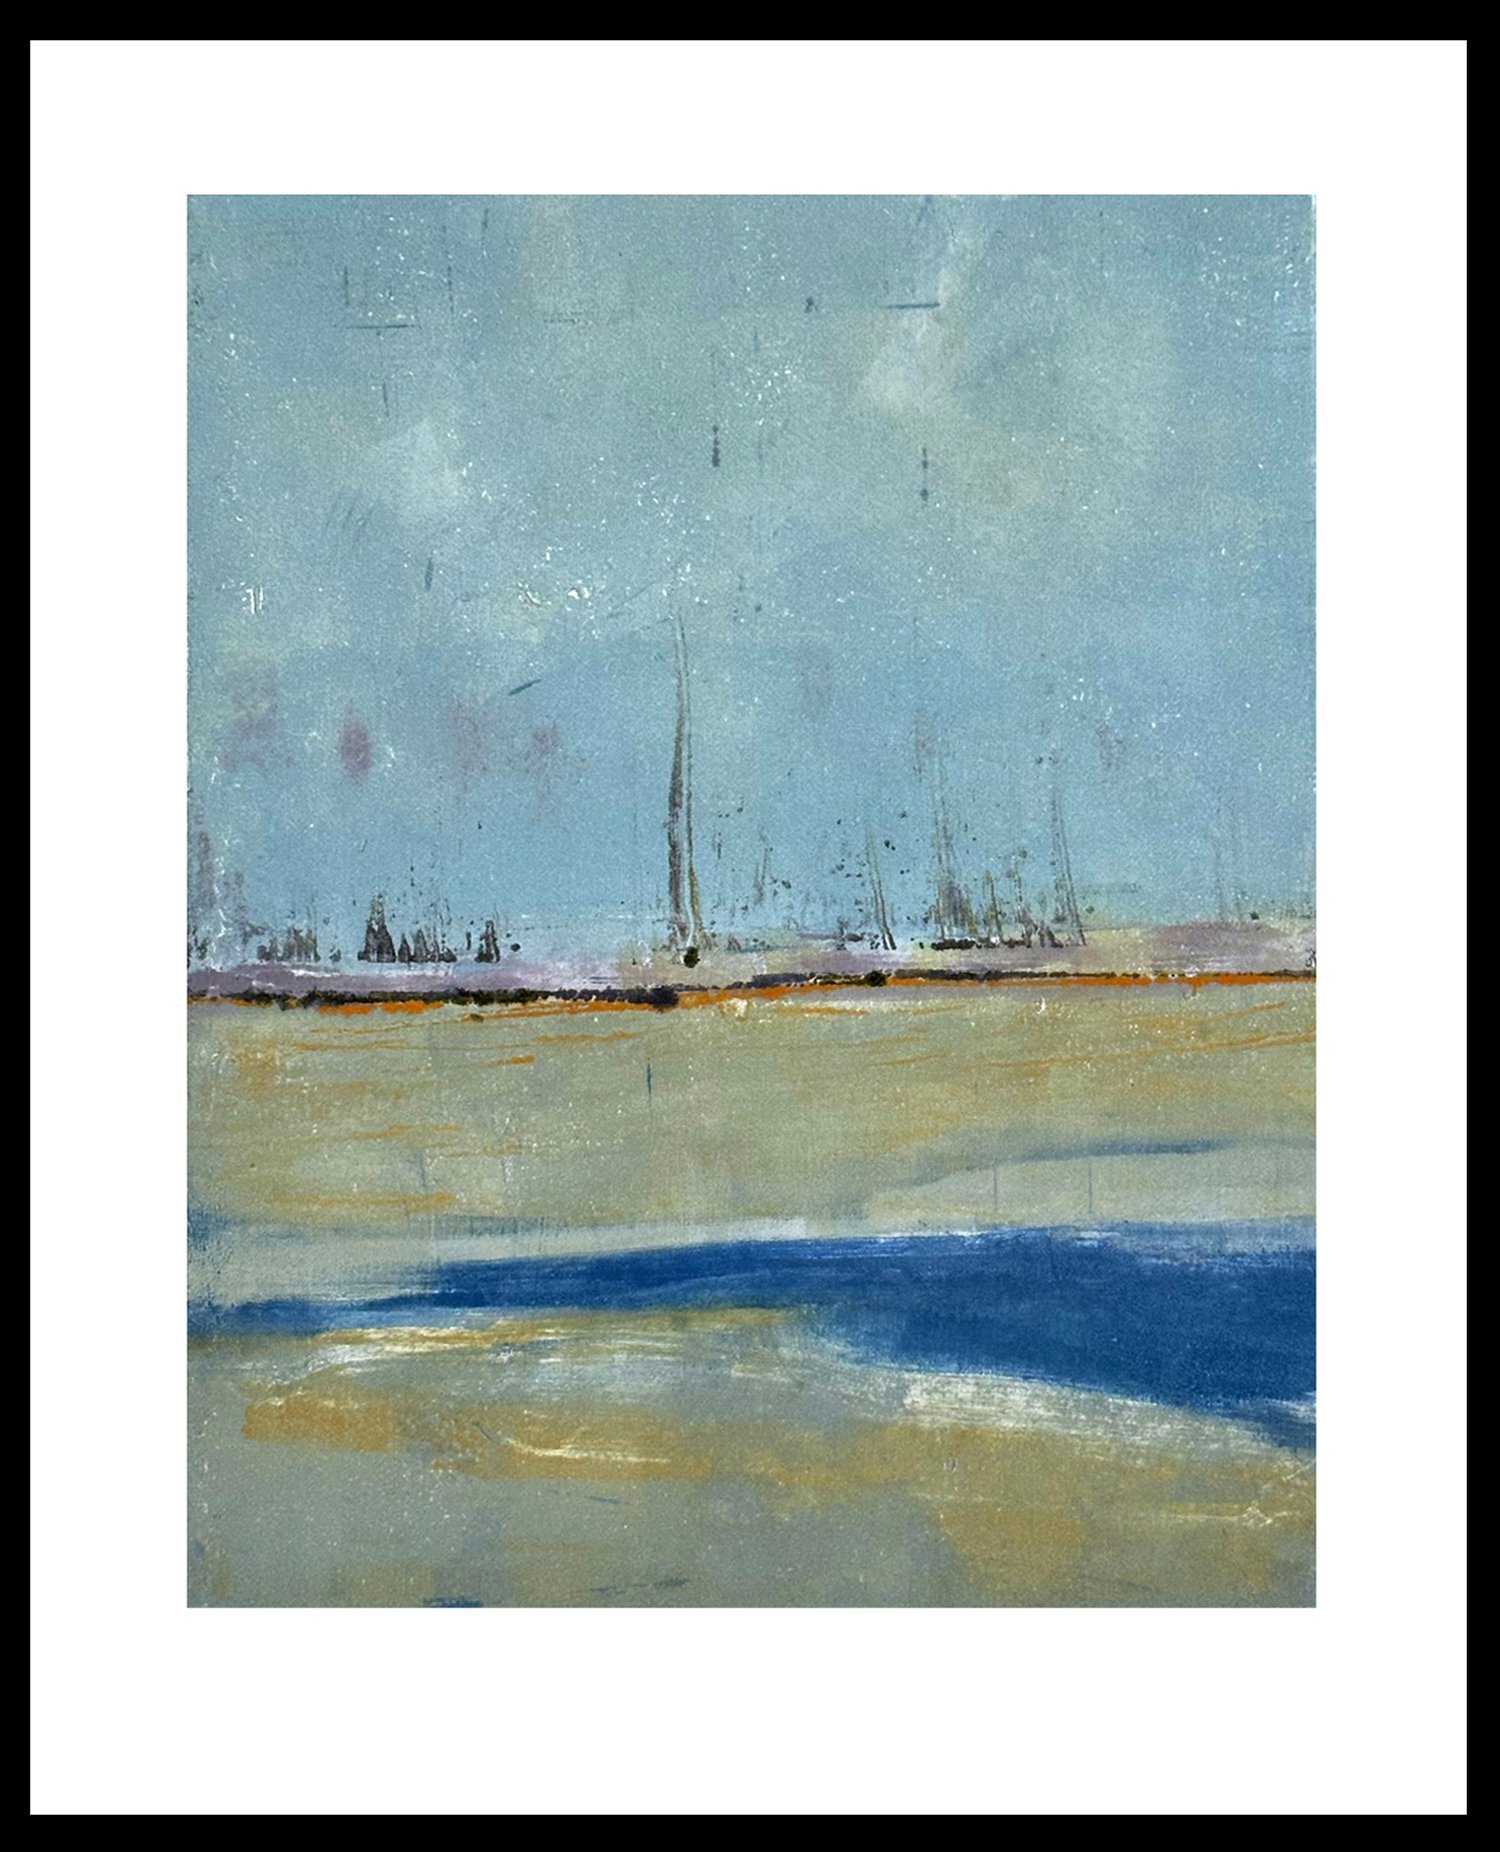    "In this River Port"    (plate size 10 x 8”, presented in black metal frame 16.75 x 14.25”) unfolds in a dance of abstract forms, hinting at boats of various sizes, bobbing on the distant water. This print captures the spirit of a lively port thro